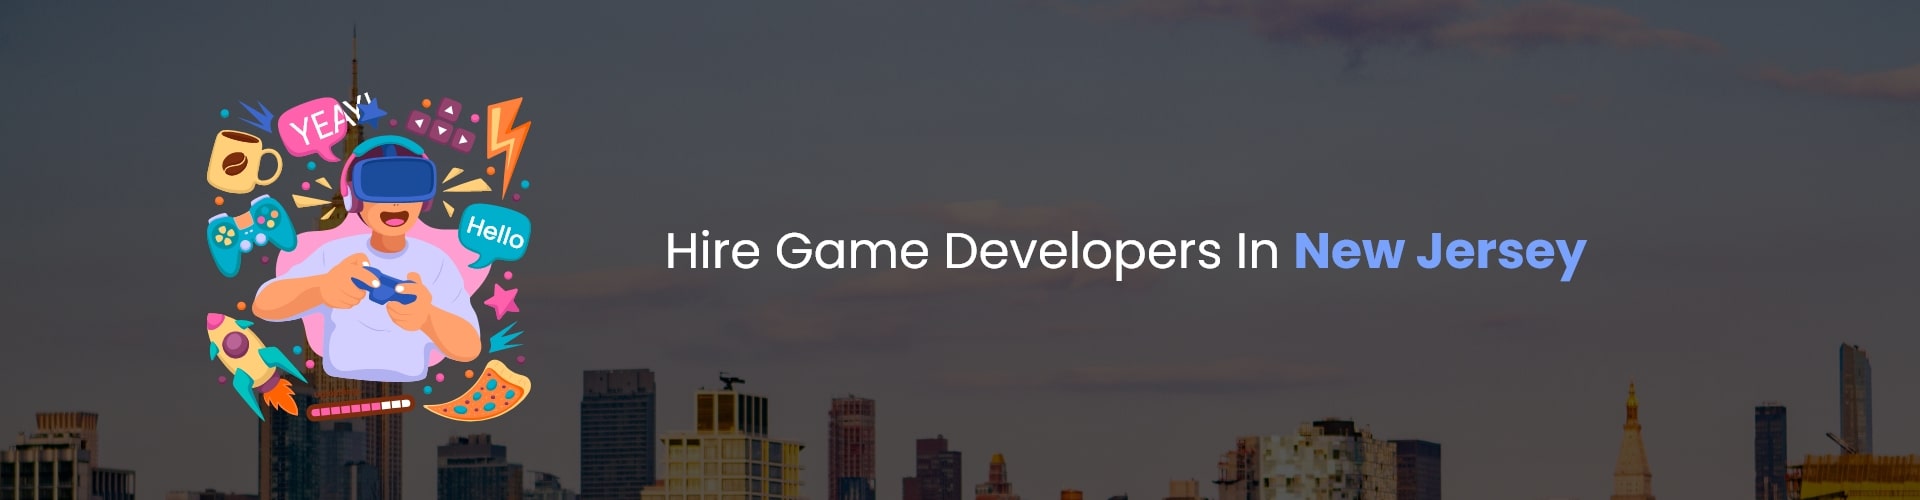 hire game developers in new jersey